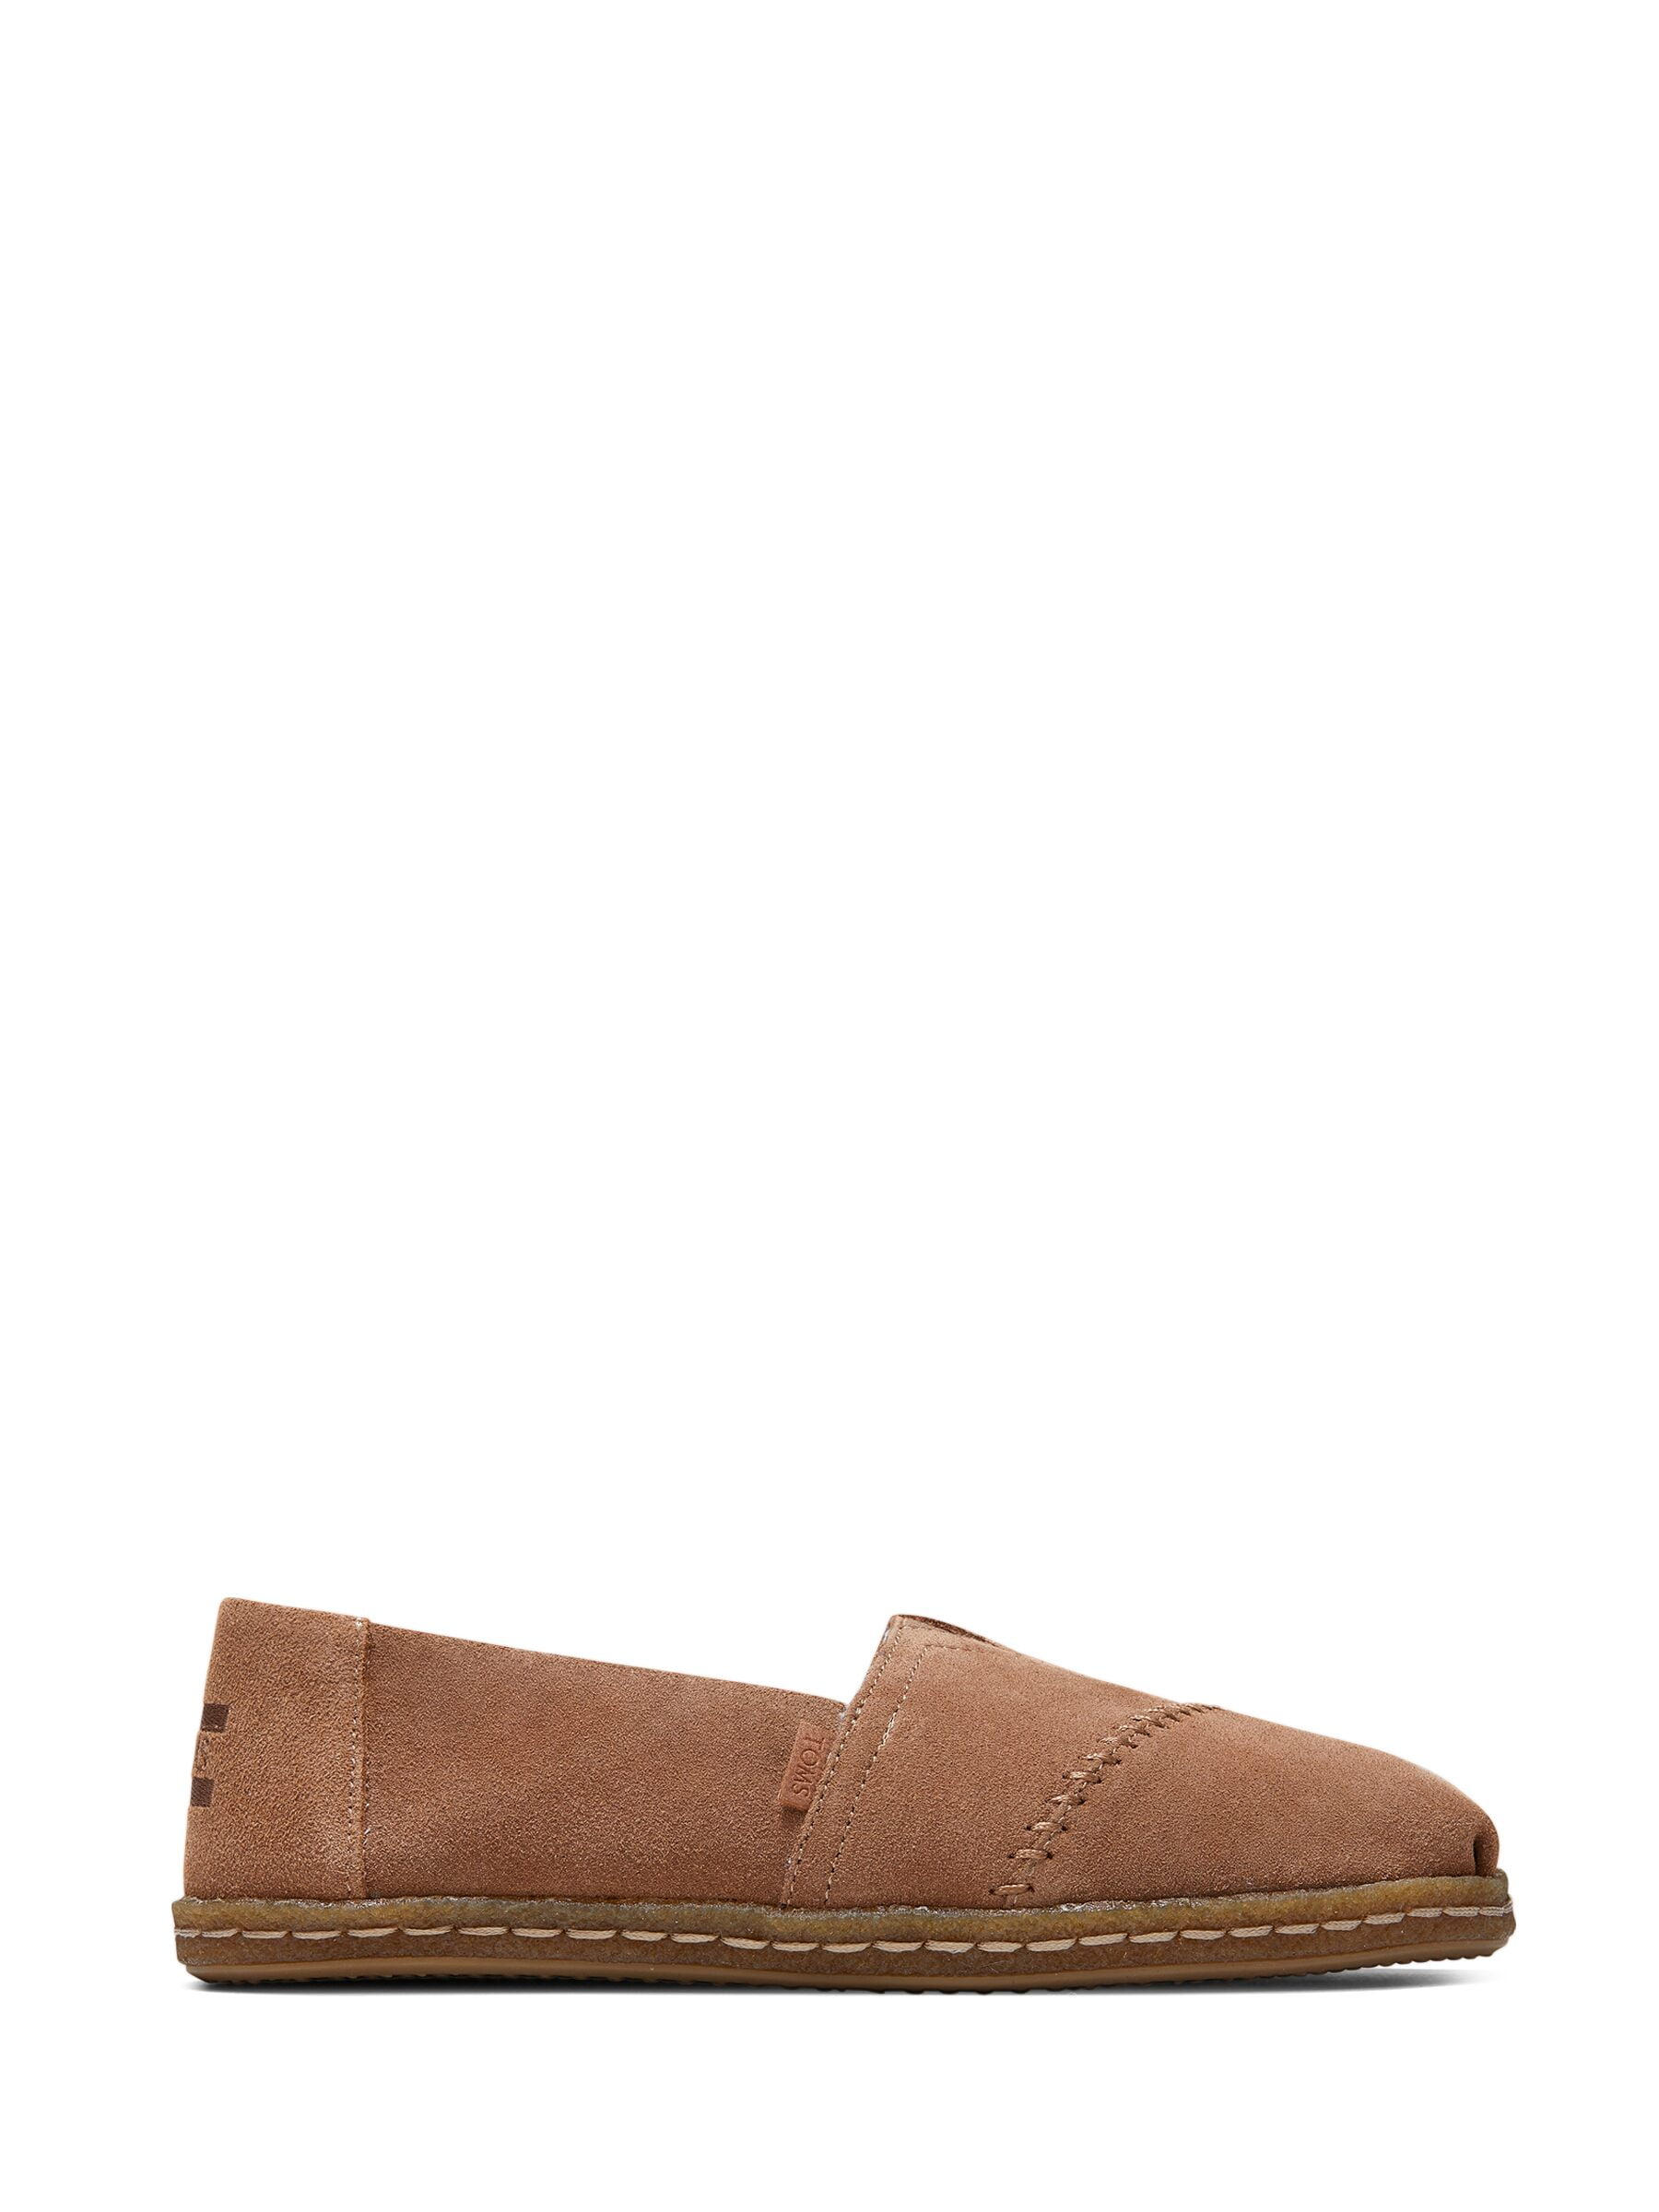 TOMS Women's Suede with Shearling 